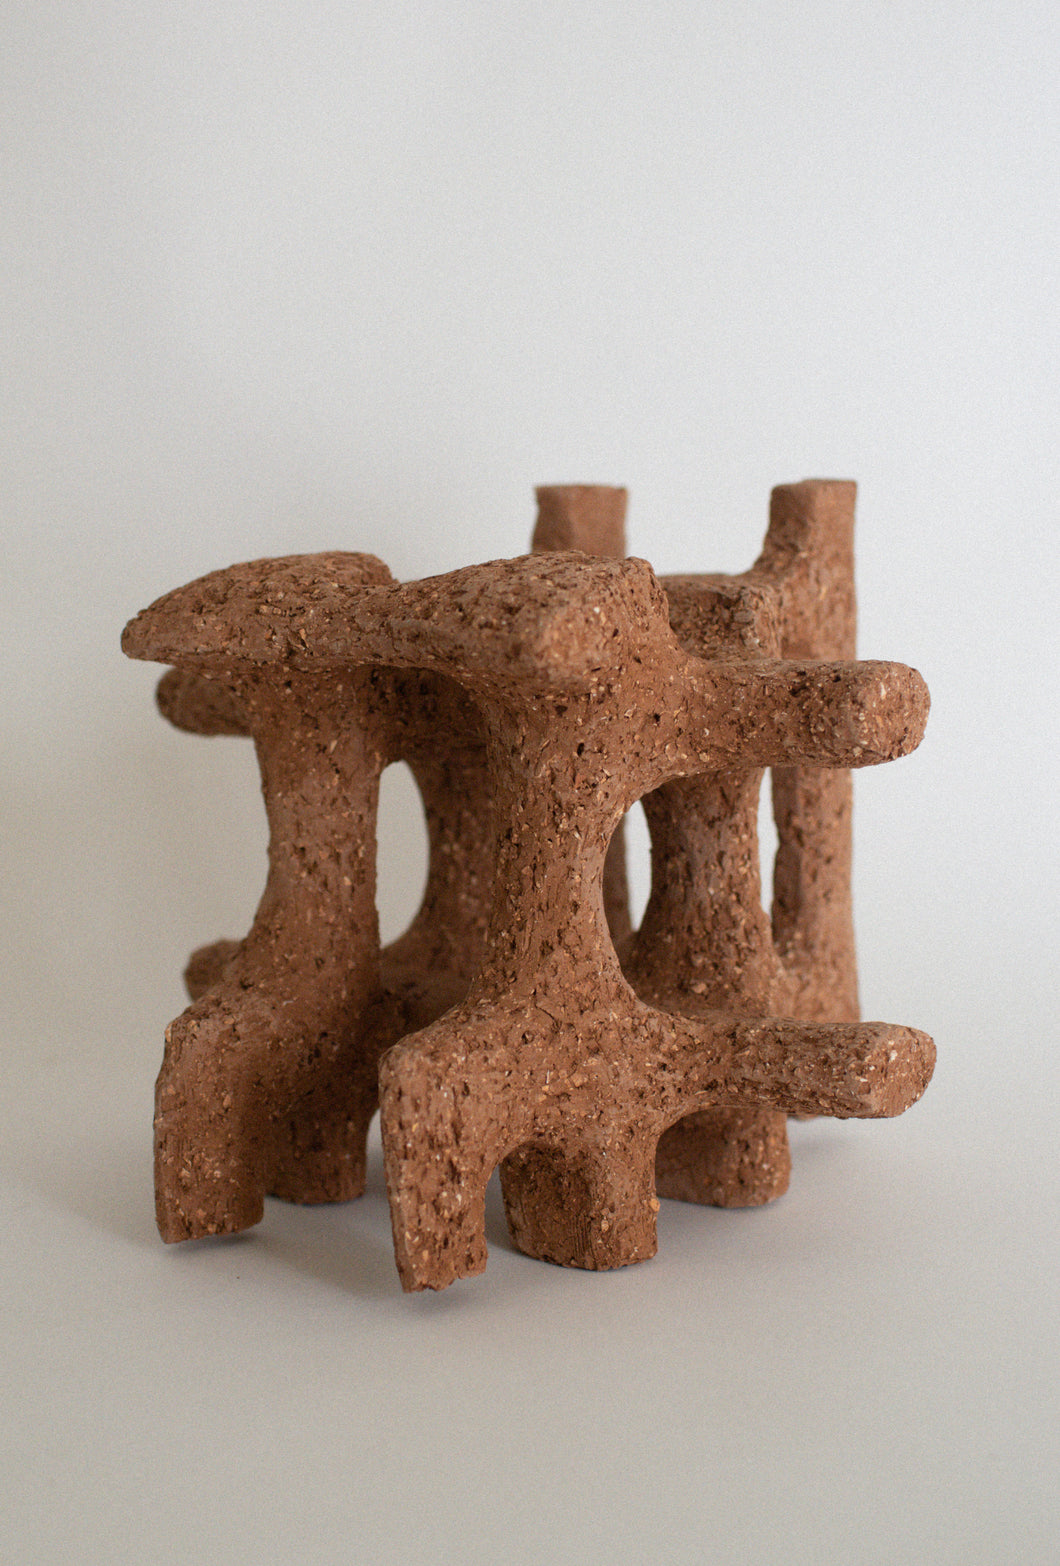 Abstract Clay Form